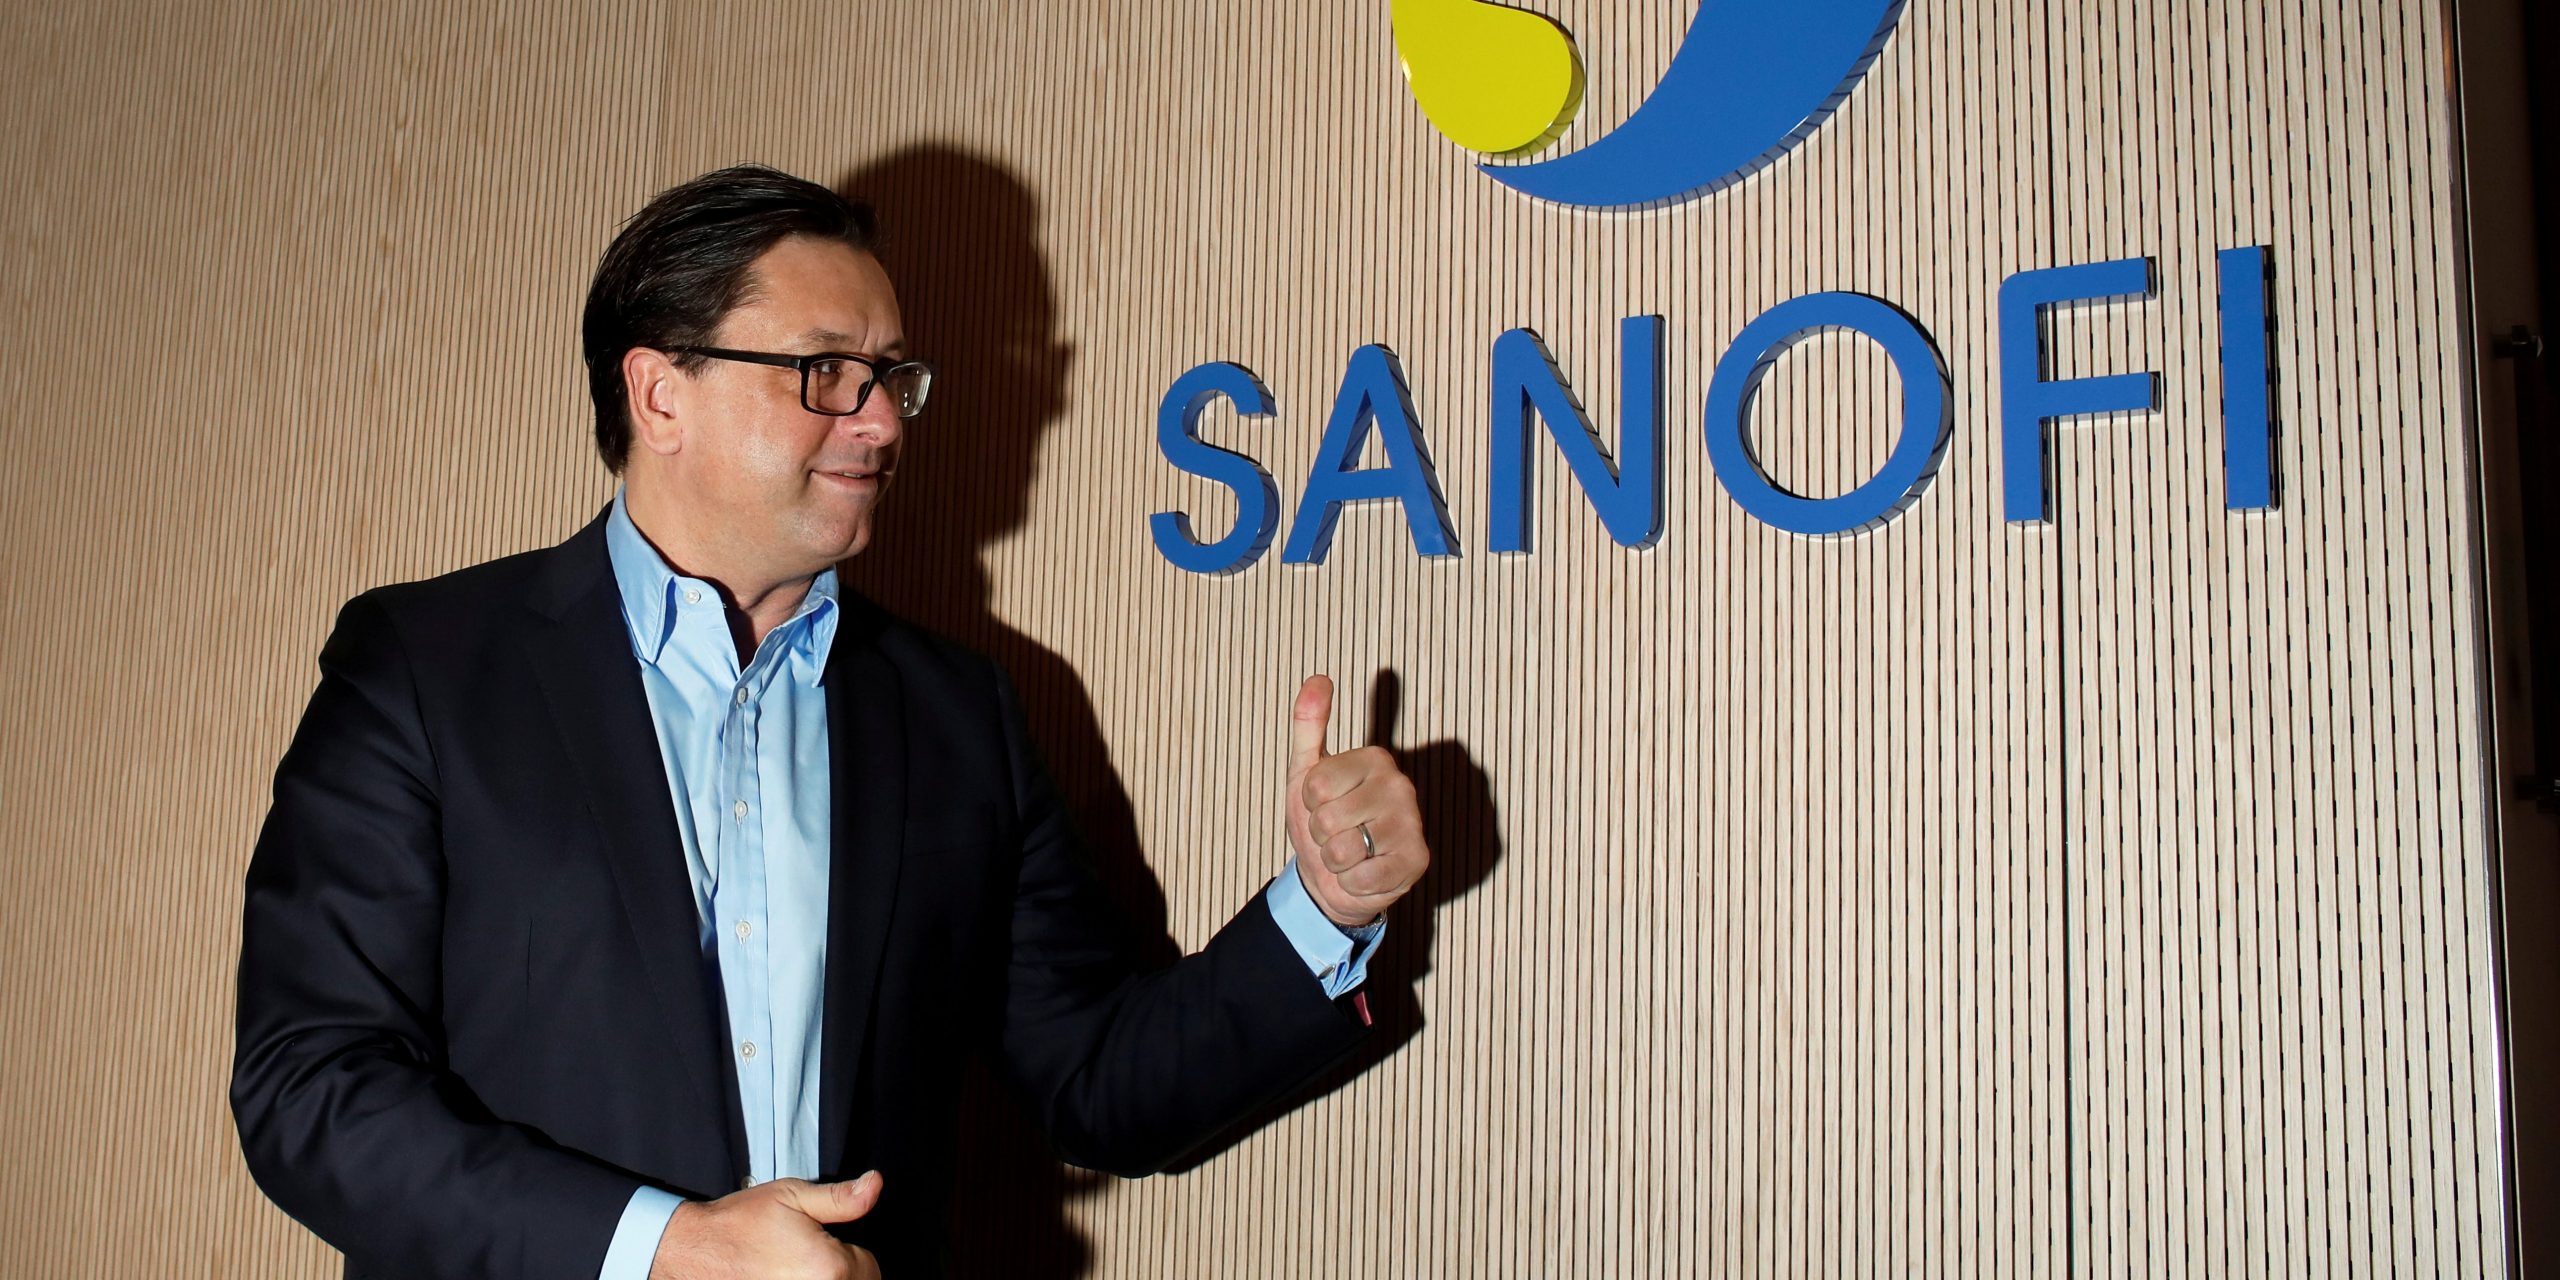 FILE PHOTO: Paul Hudson, chief executive officer of Sanofi, poses during the annual results news conference in Paris, France, February 6, 2020. REUTERS/Benoit Tessier